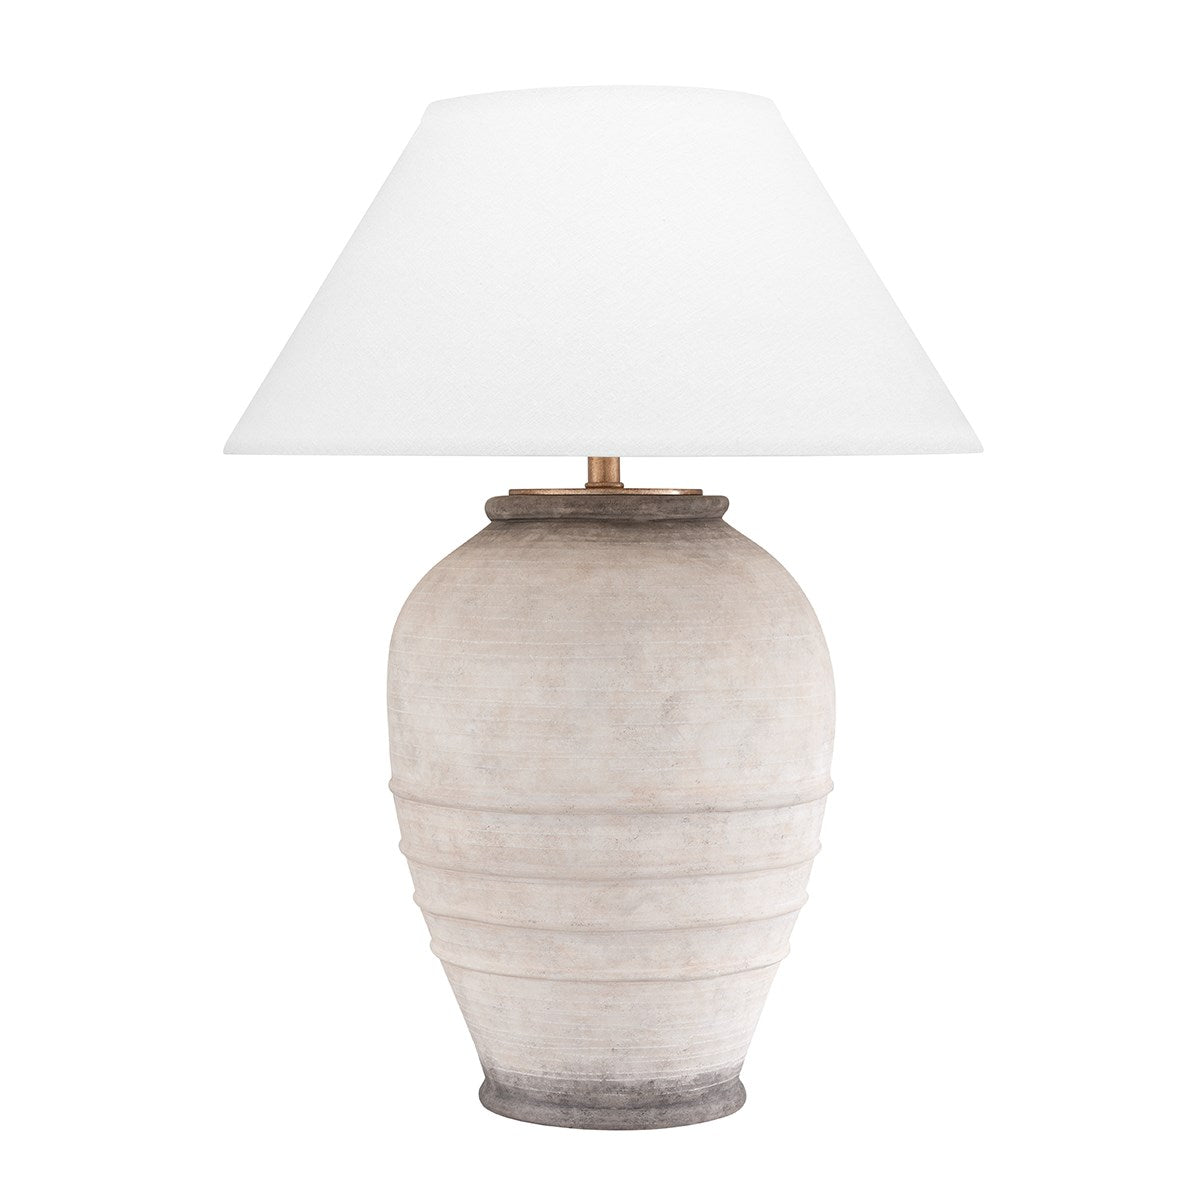 Decatur Table Lamp - Rug & Weave